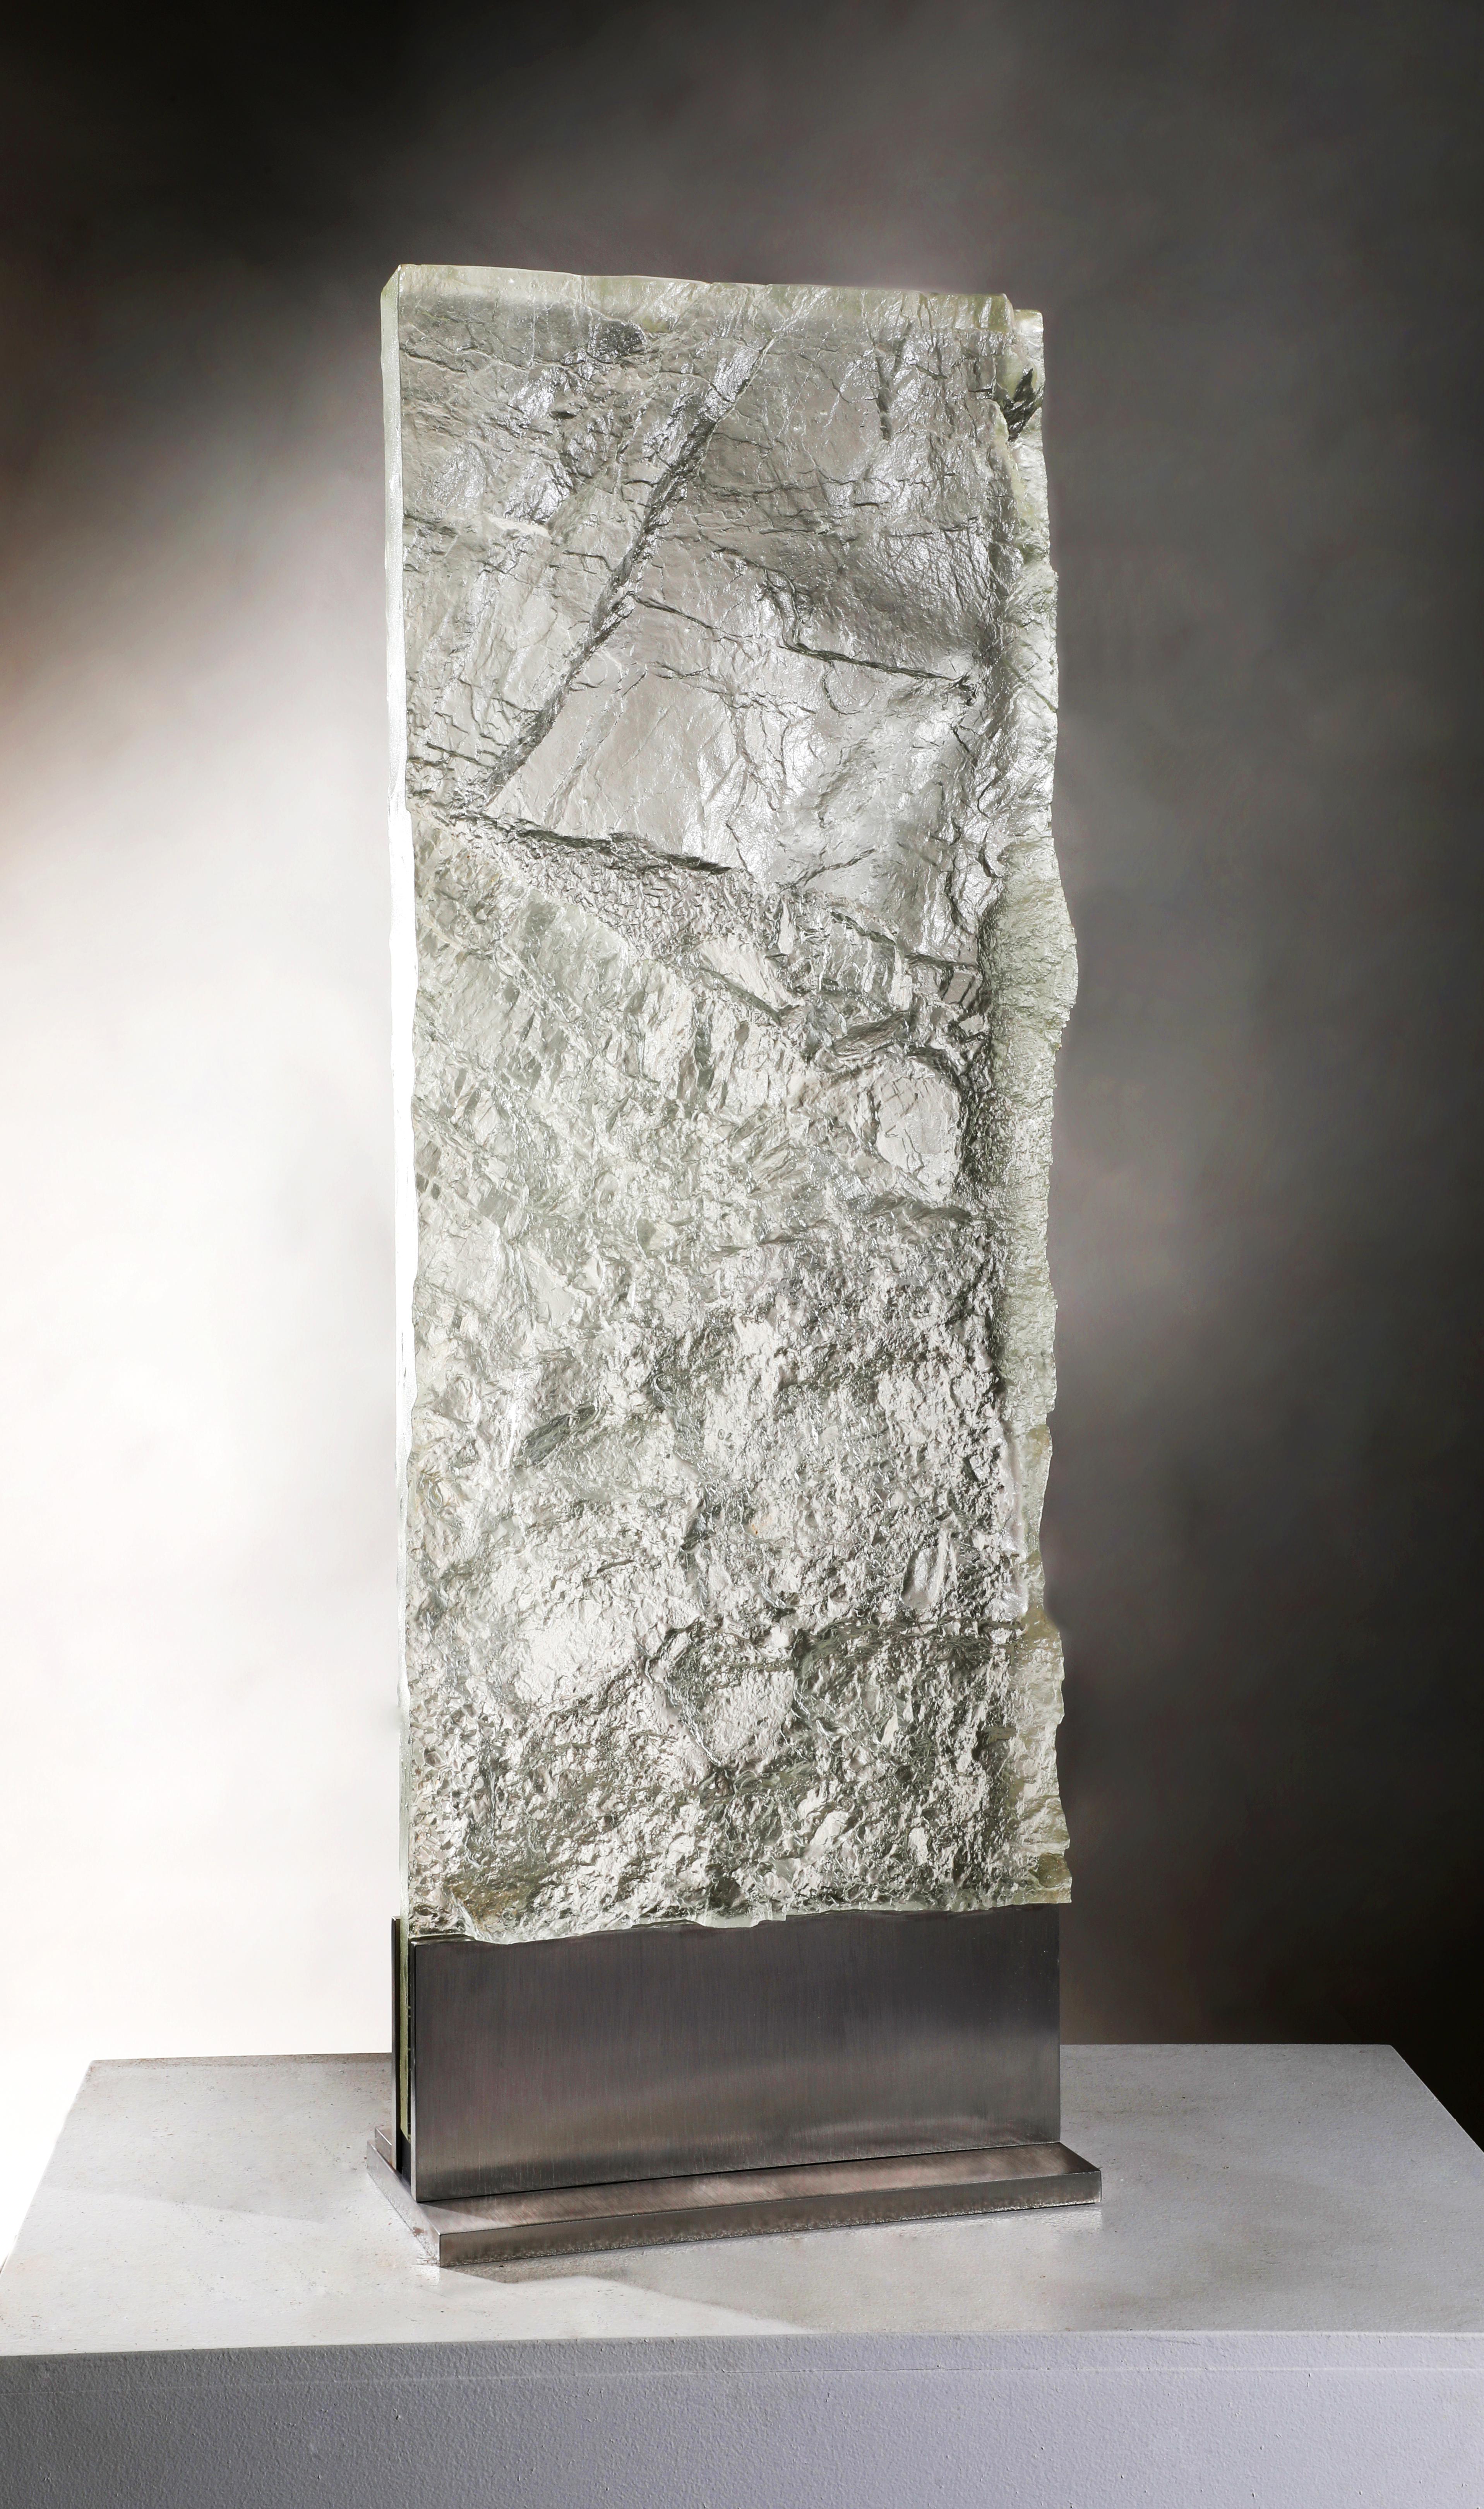 Please allow a three month turnaround time for piece to be made.

About the Geologic Editions:
The Geologic Editions are studies for Colorado Cascade Mural. David pieced together bits of the original rock and ice castings to try various